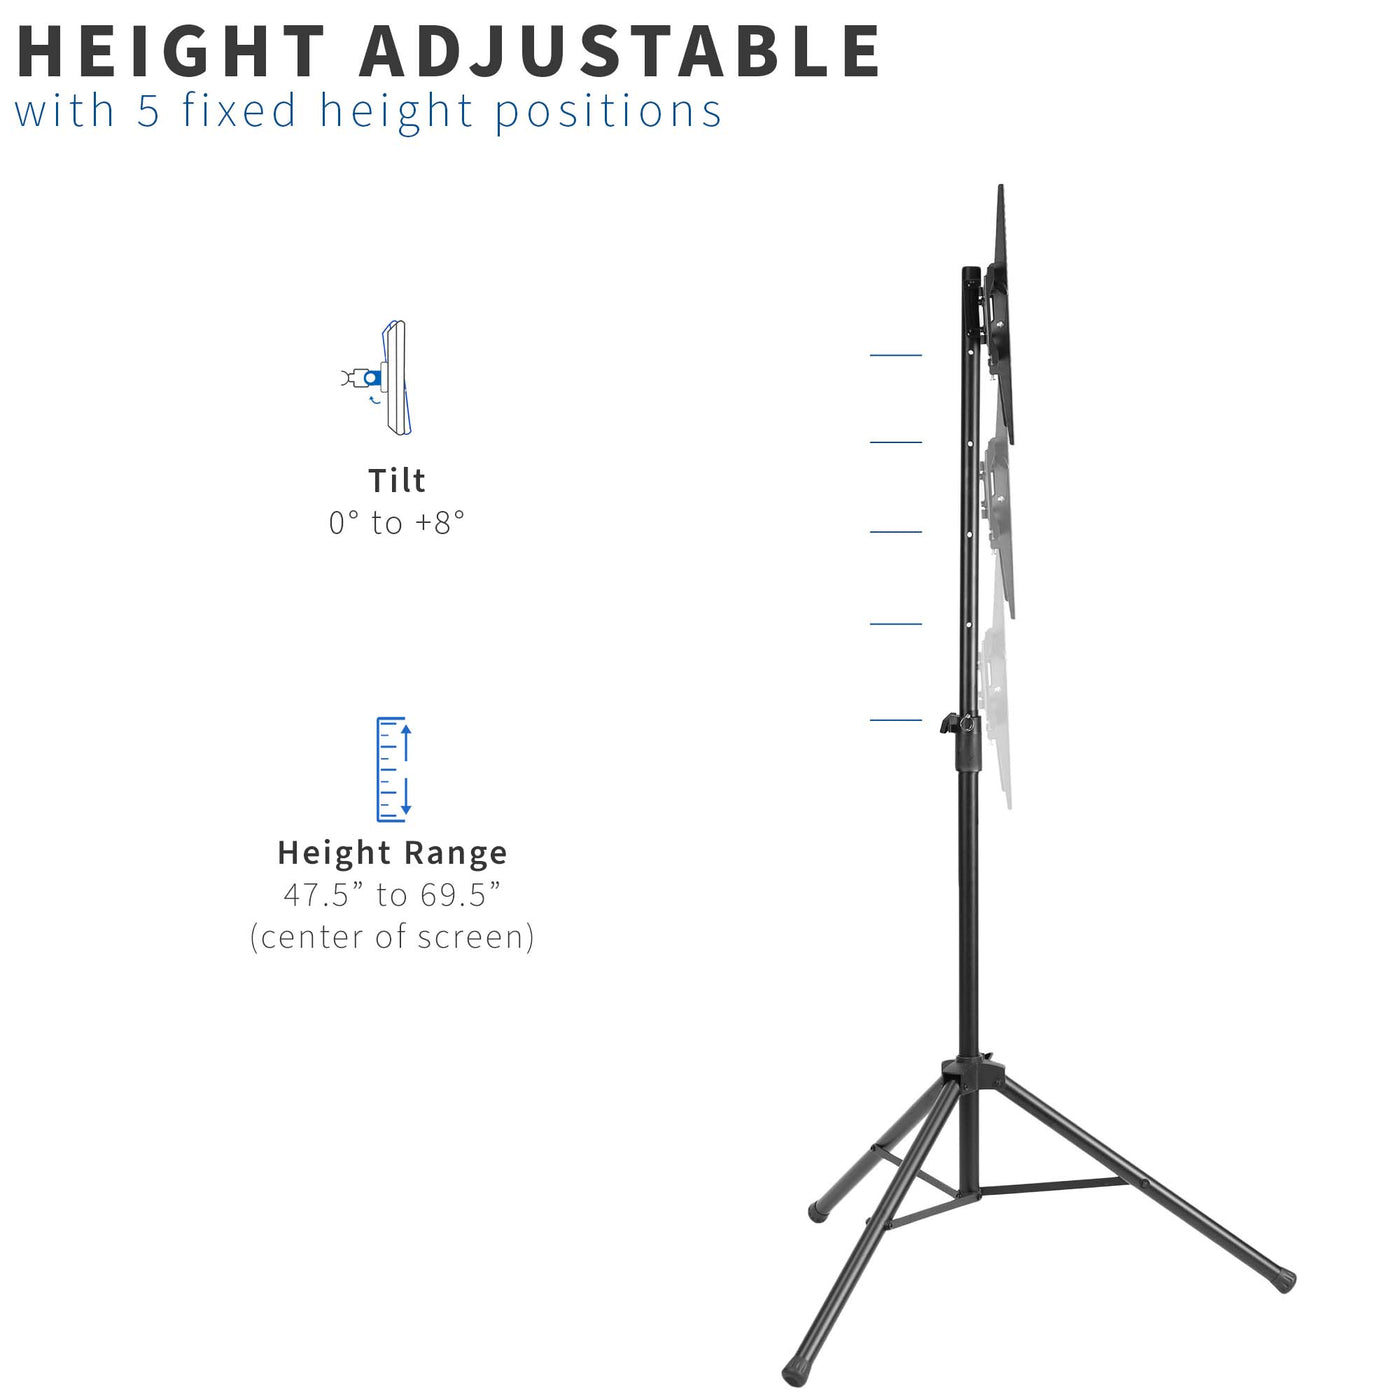 Height adjustable tripod stand from VIVO.